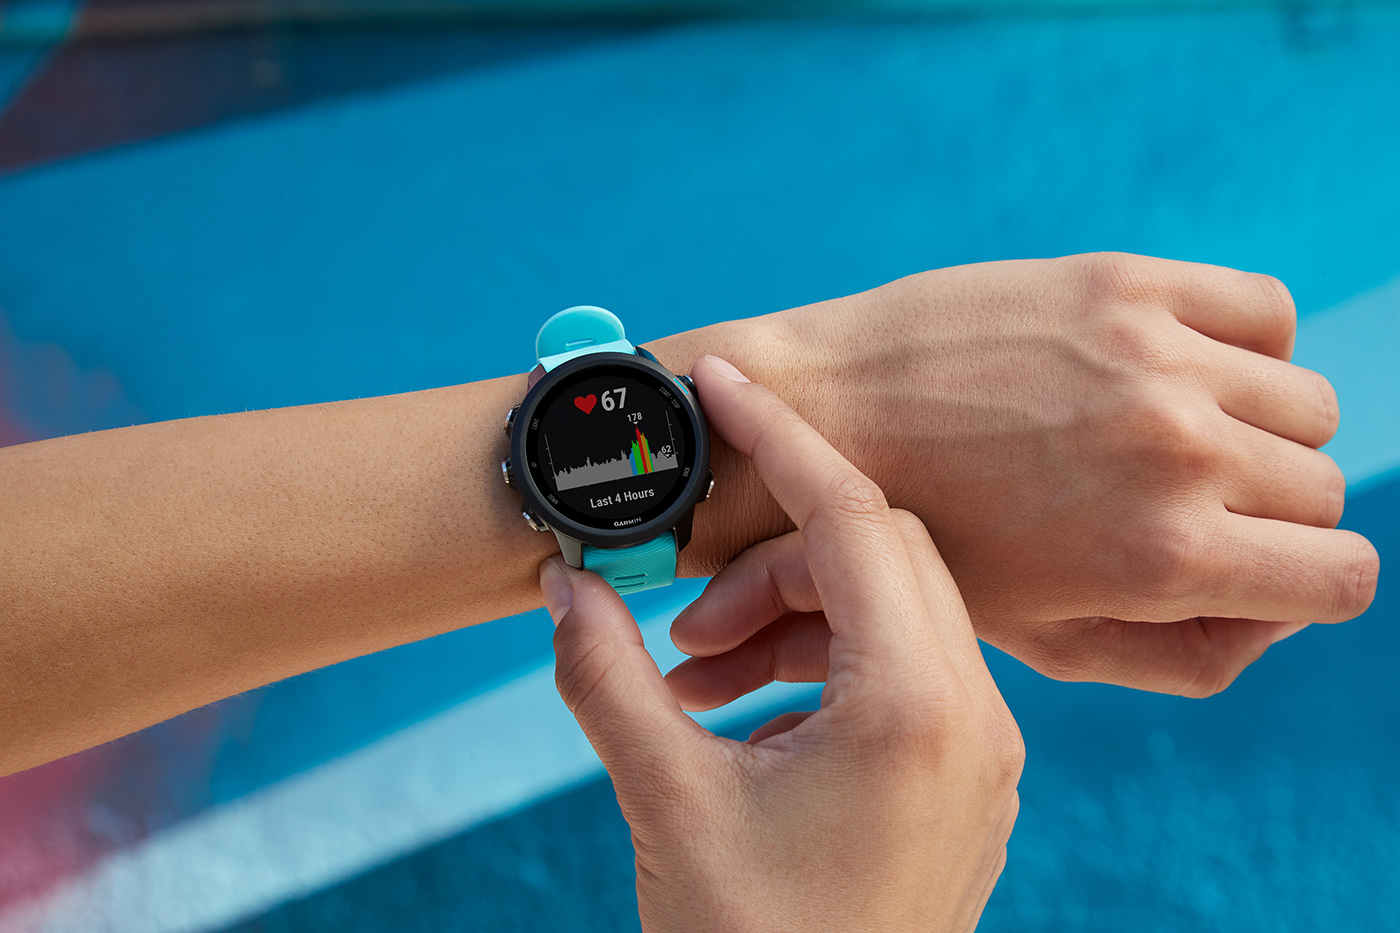 Garmin smartwatches measure your heart rate 24/7